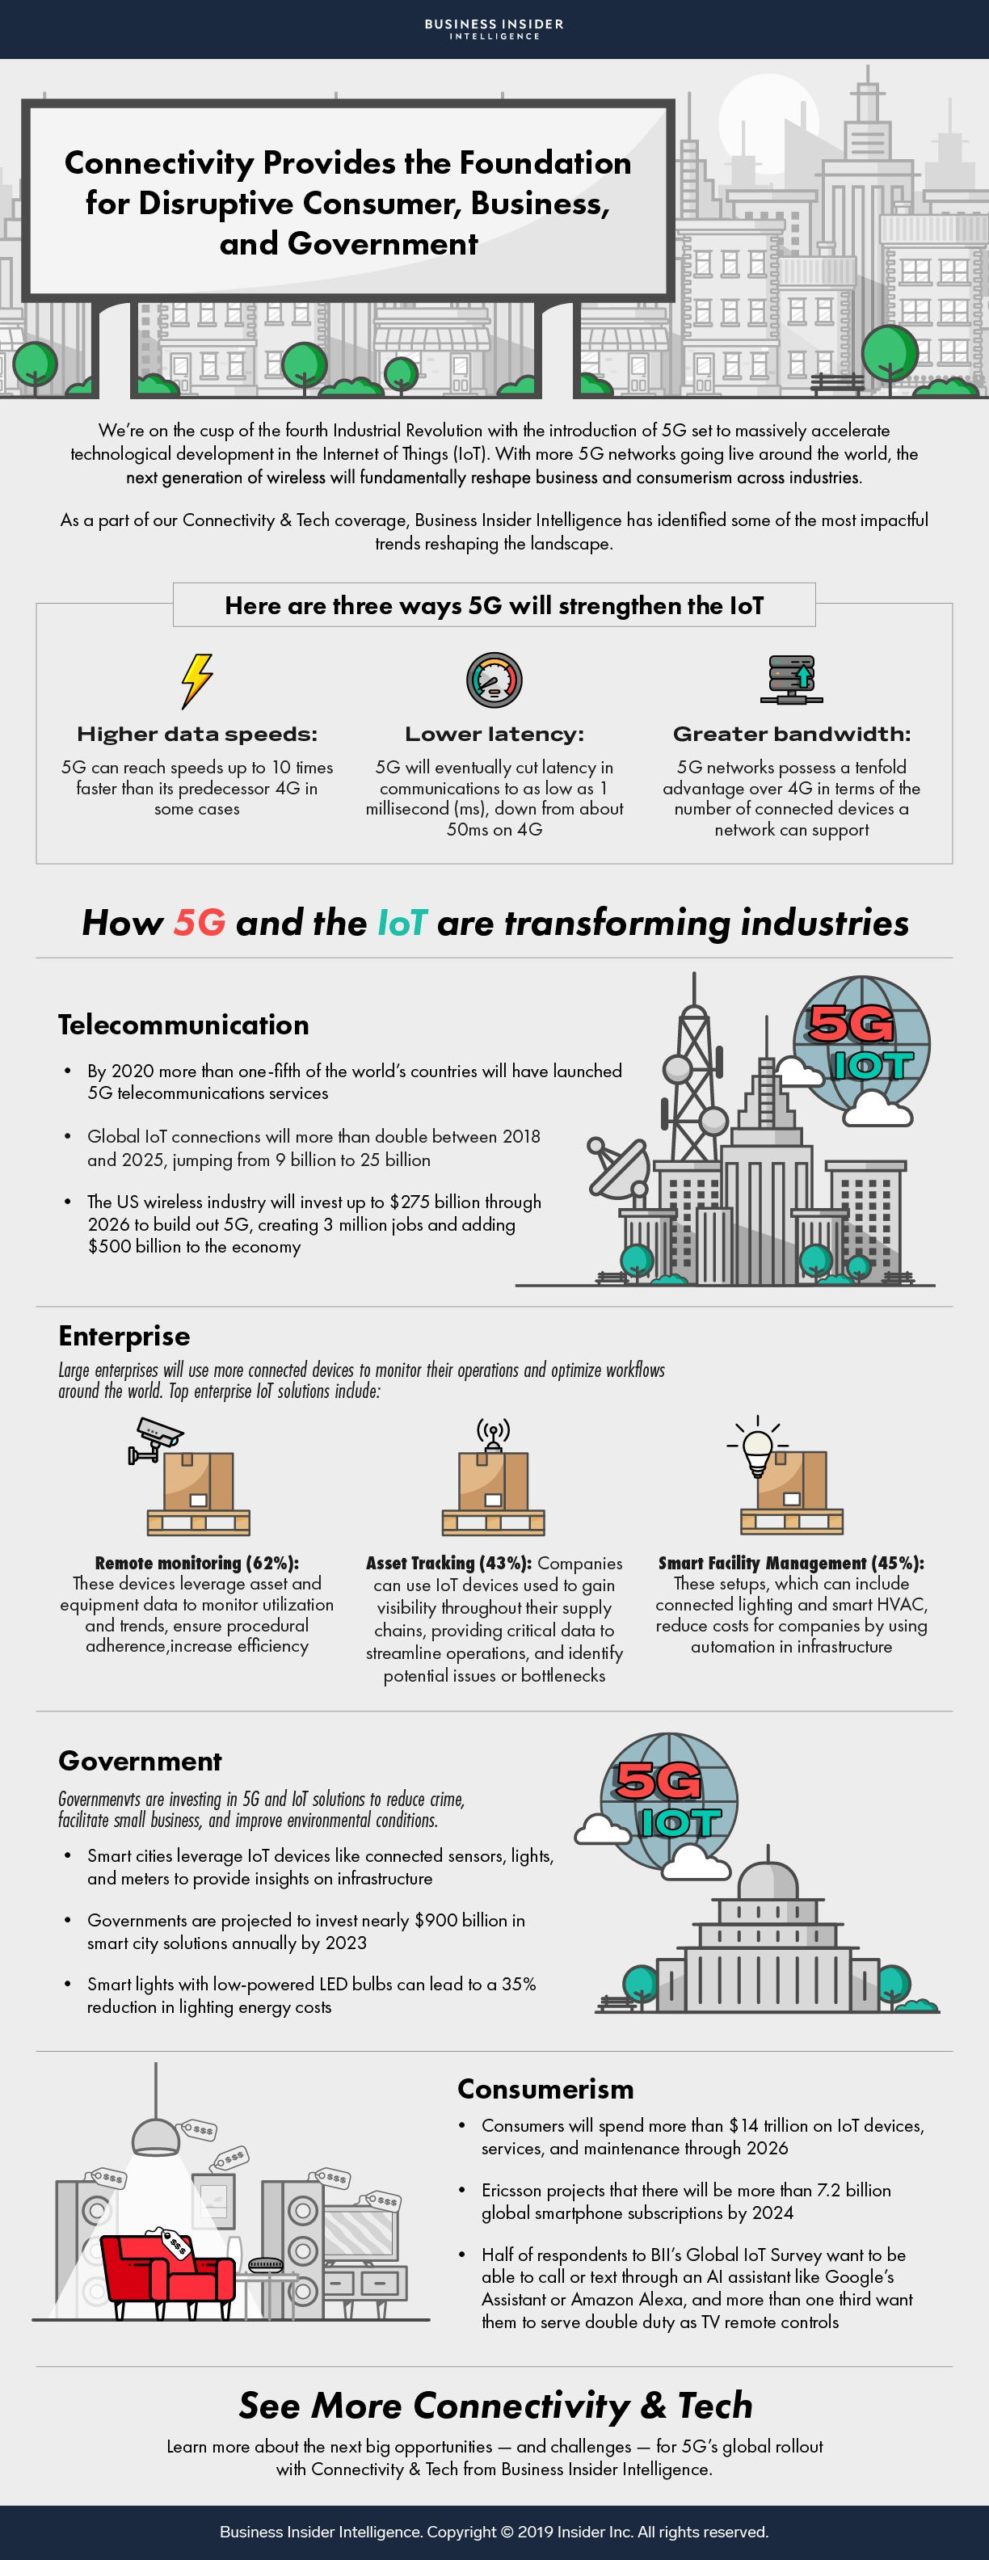 infographic 5g iot internet of things